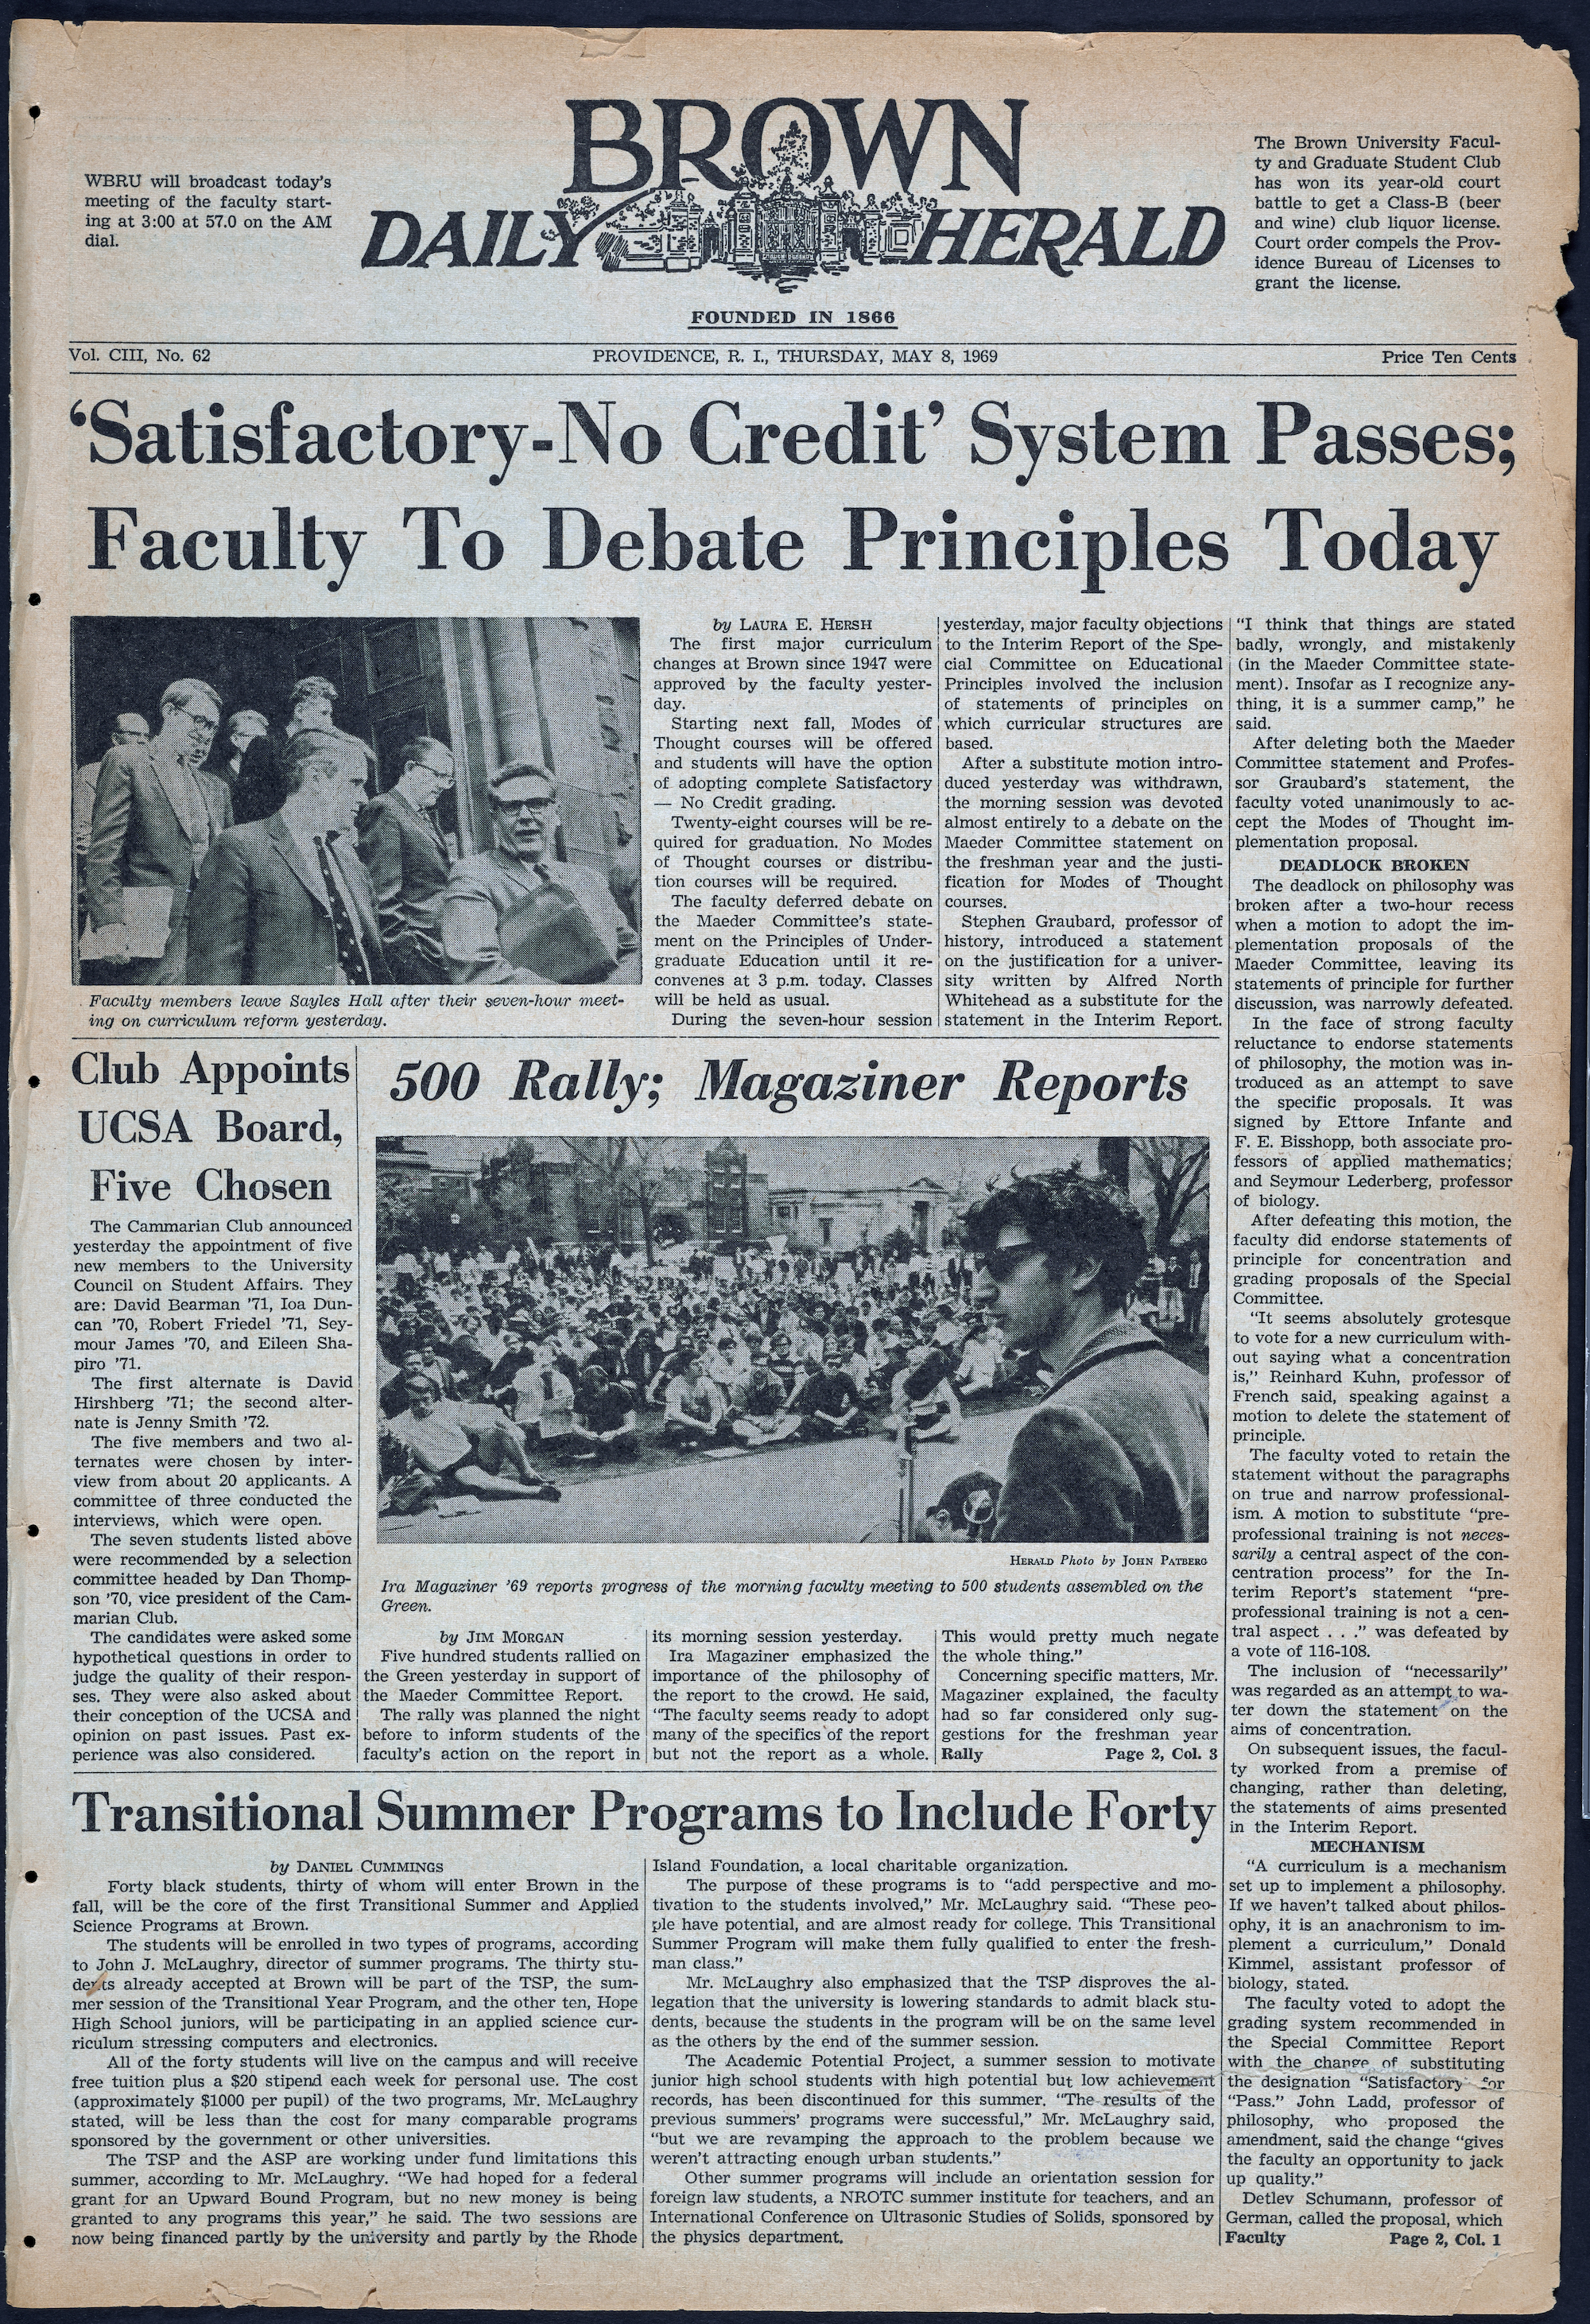 From page of Brown Daily Herald from May 8, 1969